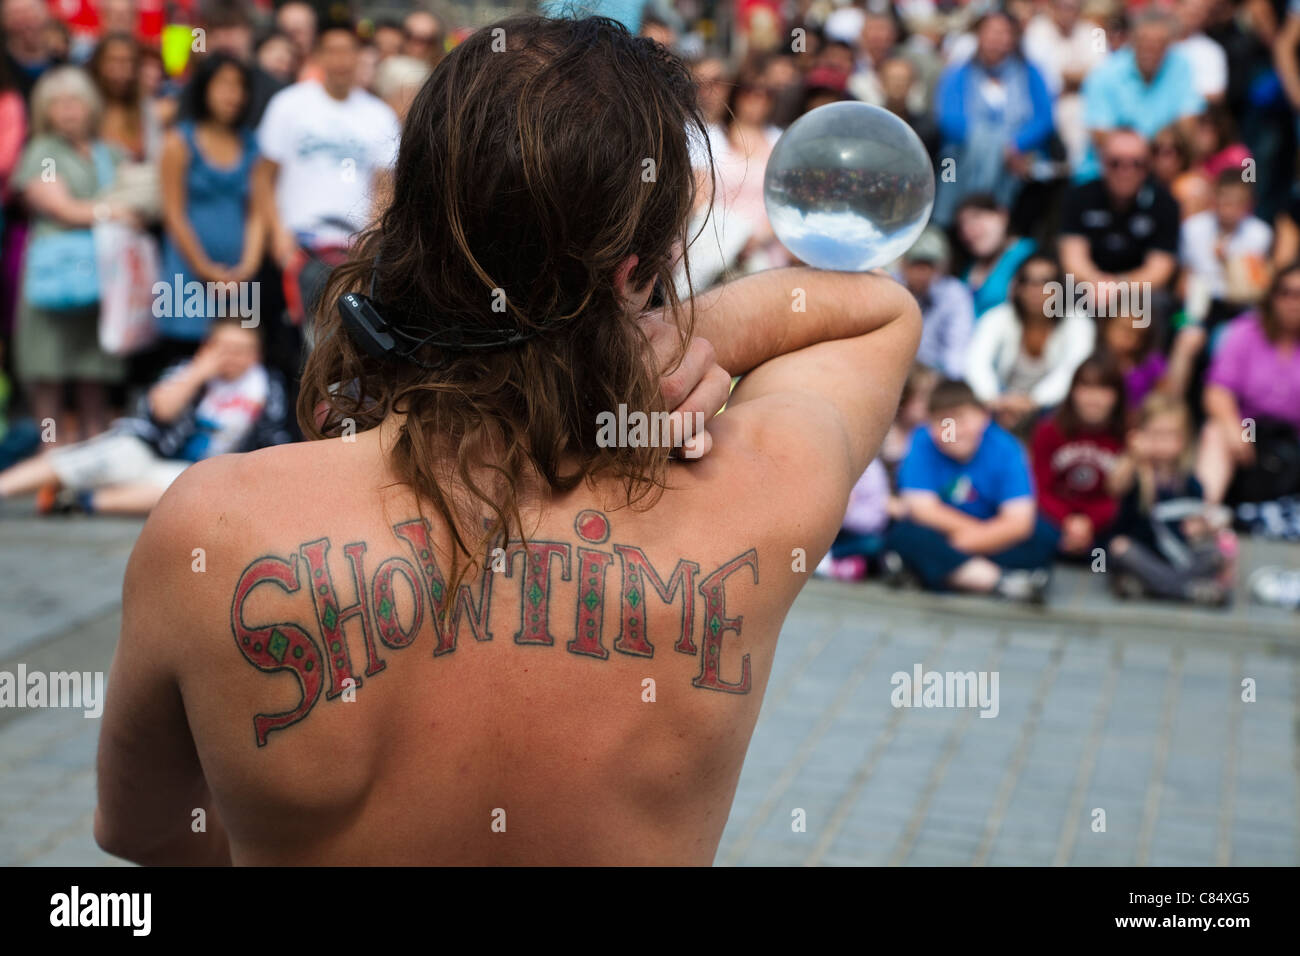 Street entertainer at The Edinburgh Fringe Festival with a tattoo of 'Showtime' on his back, playing to an audience on The Mound Stock Photo